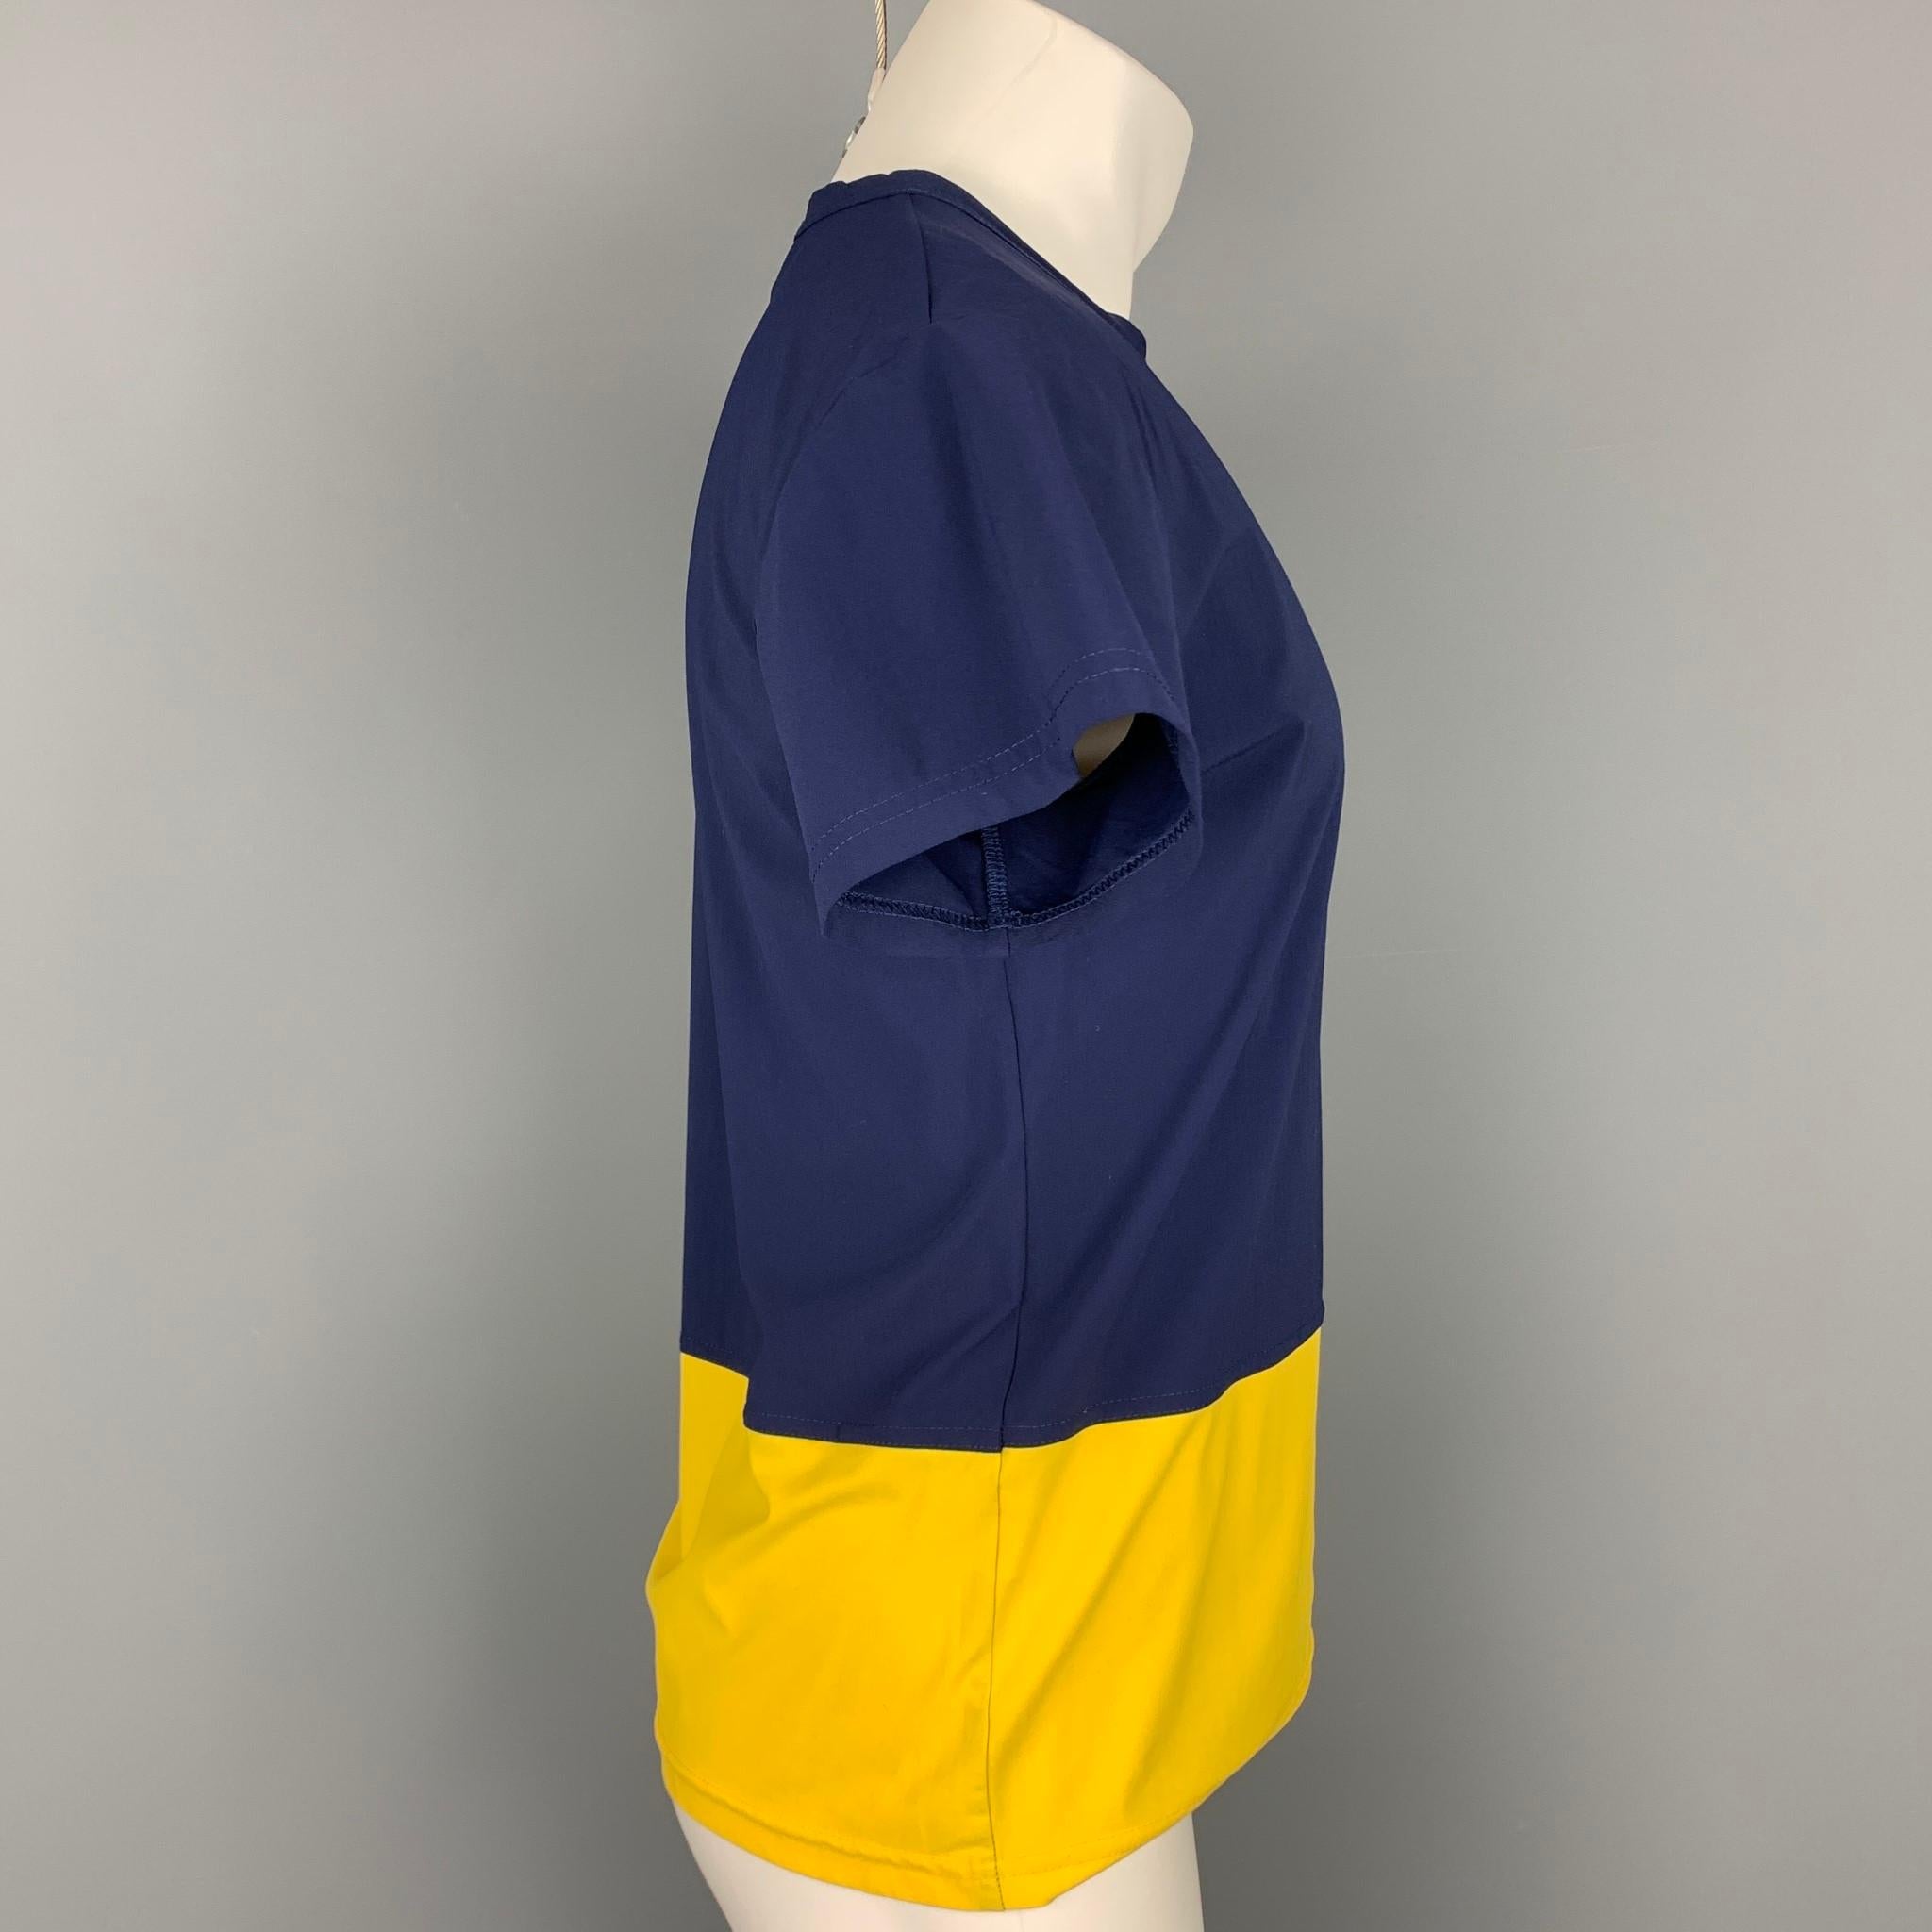 JOHN BARTLETT t-shirt comes in a blue & yellow color block polyamide featuring a slim fit and a crew-neck. Made in Italy.

Very Good Pre-Owned Condition.
Marked: IT 54

Measurements:

Shoulder: 20 in.
Chest: 40 in.
Sleeve: 6 in.
Length: 24.5 in. 